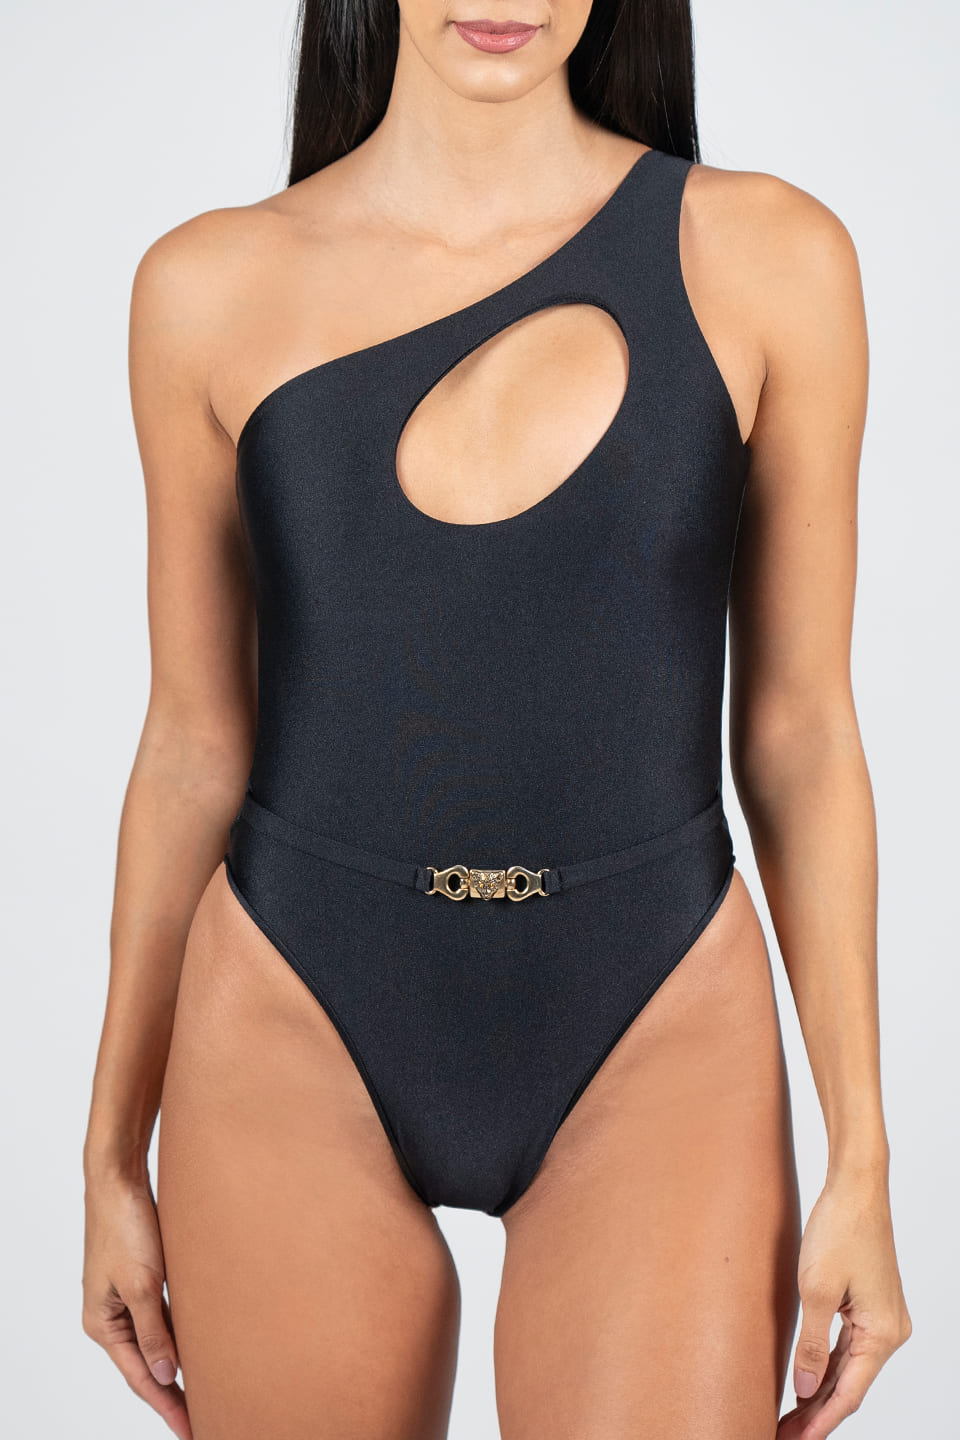 Shop online trendy Black Swimsuits from Lavishly Appointed Fashion designer. Product gallery 1